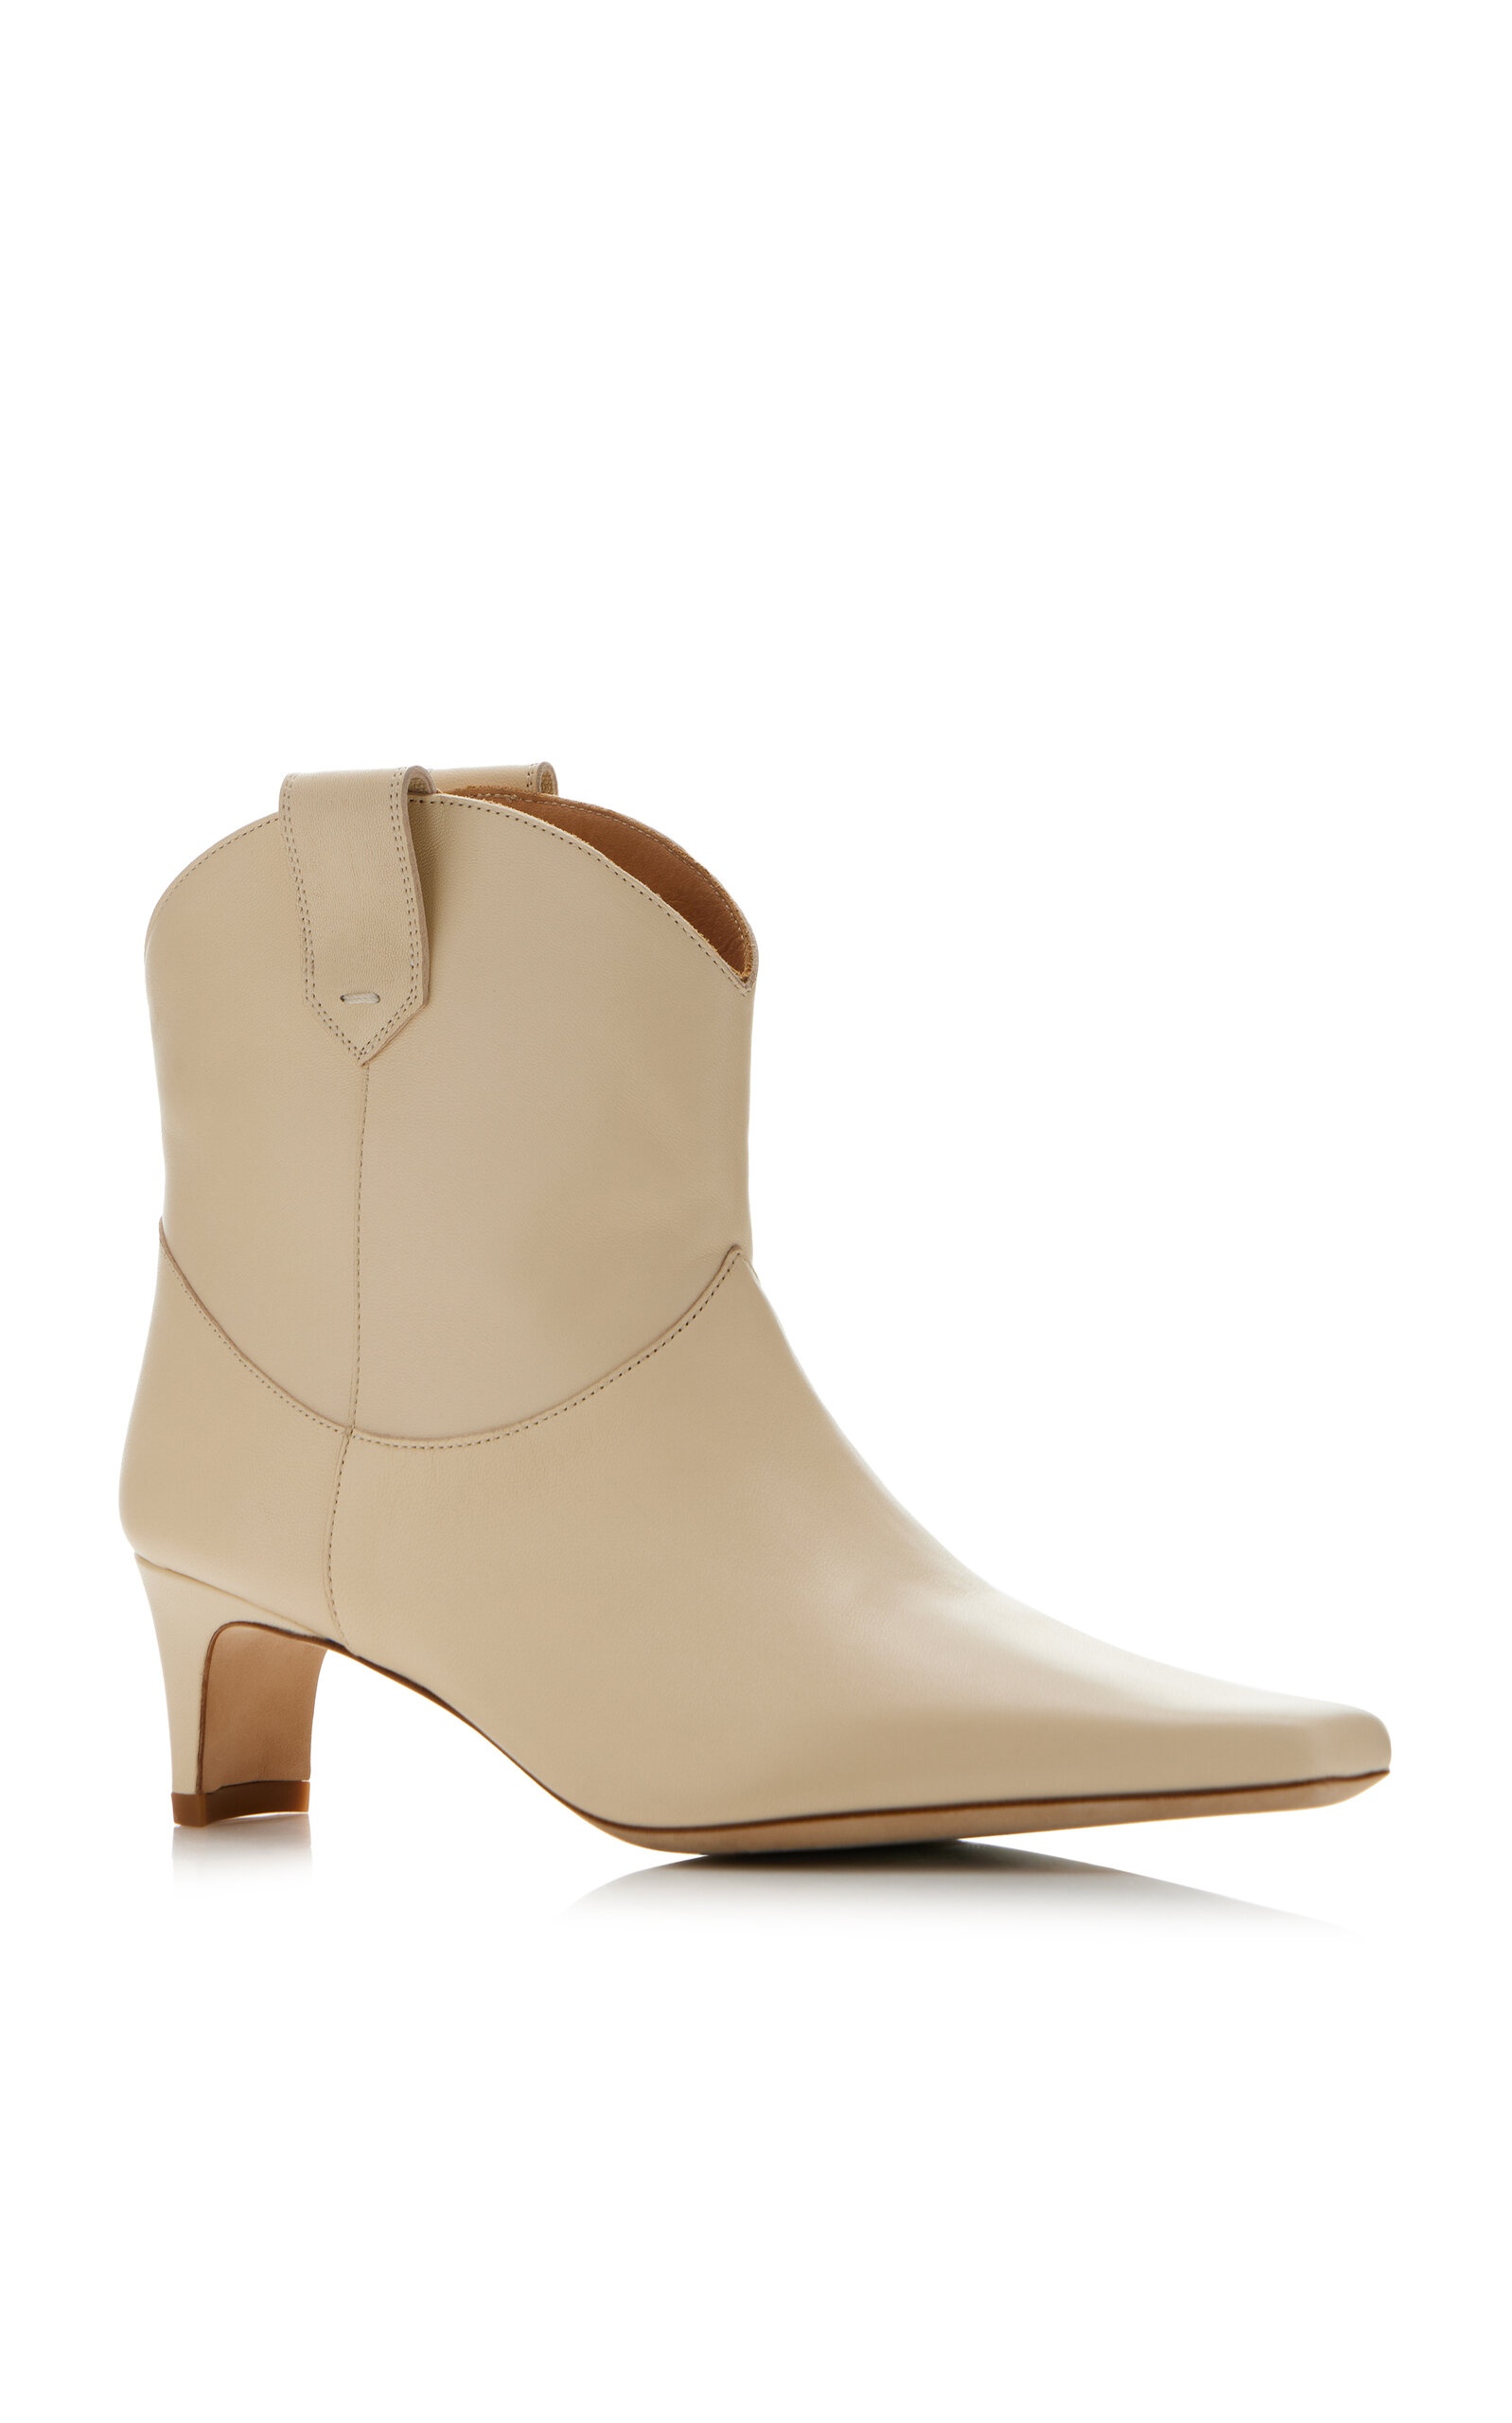 Wally Western Leather Ankle Boots ivory - 5